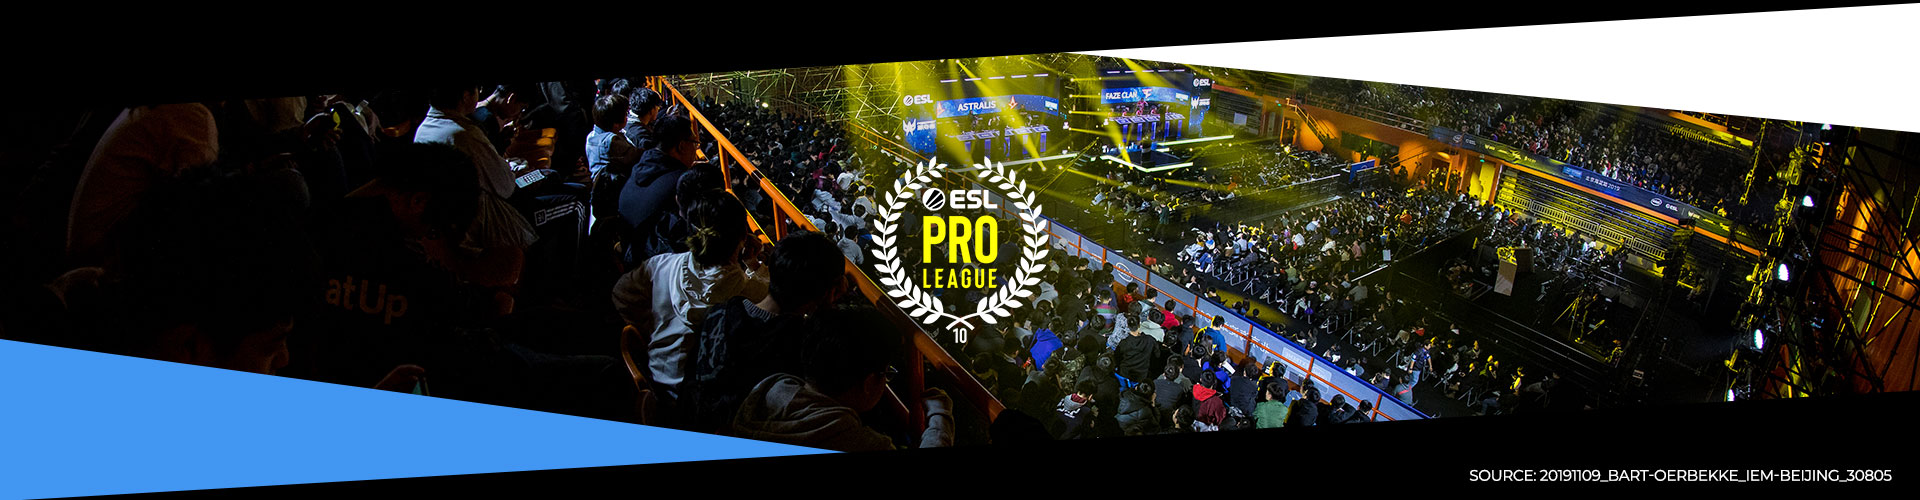 First Look at ESL Pro League Odense